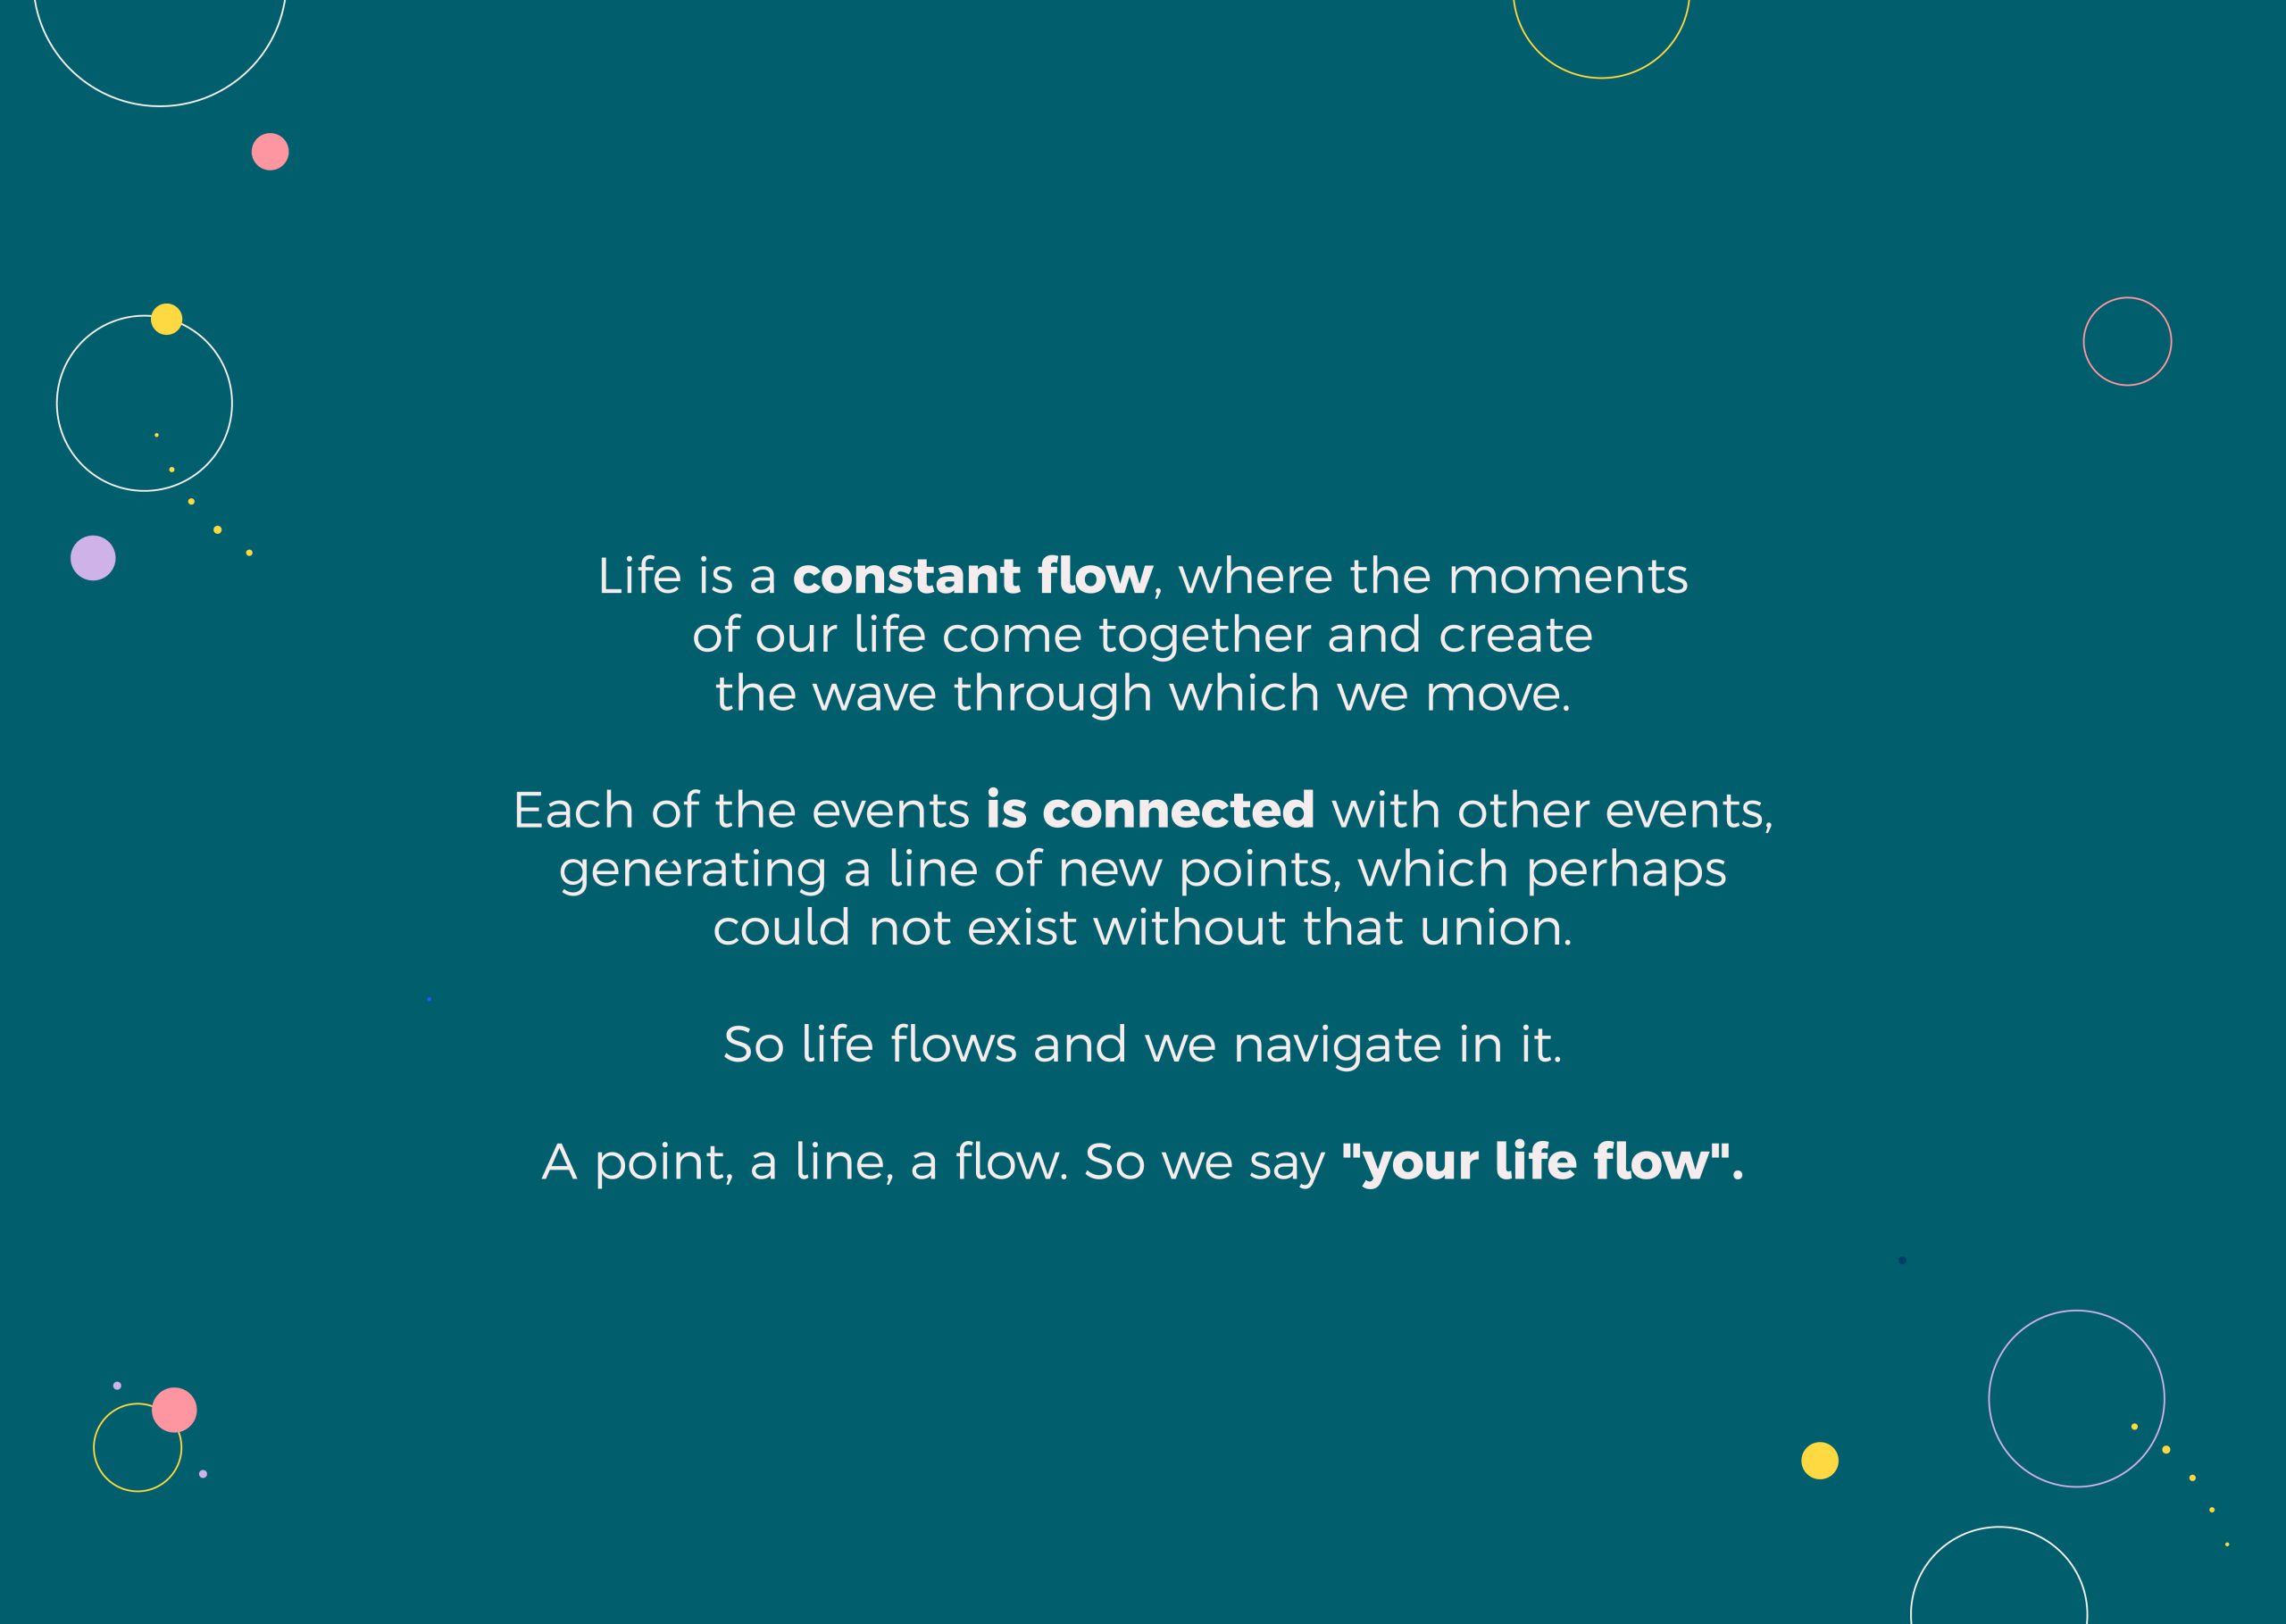 Web_Magia_Your life flow-04